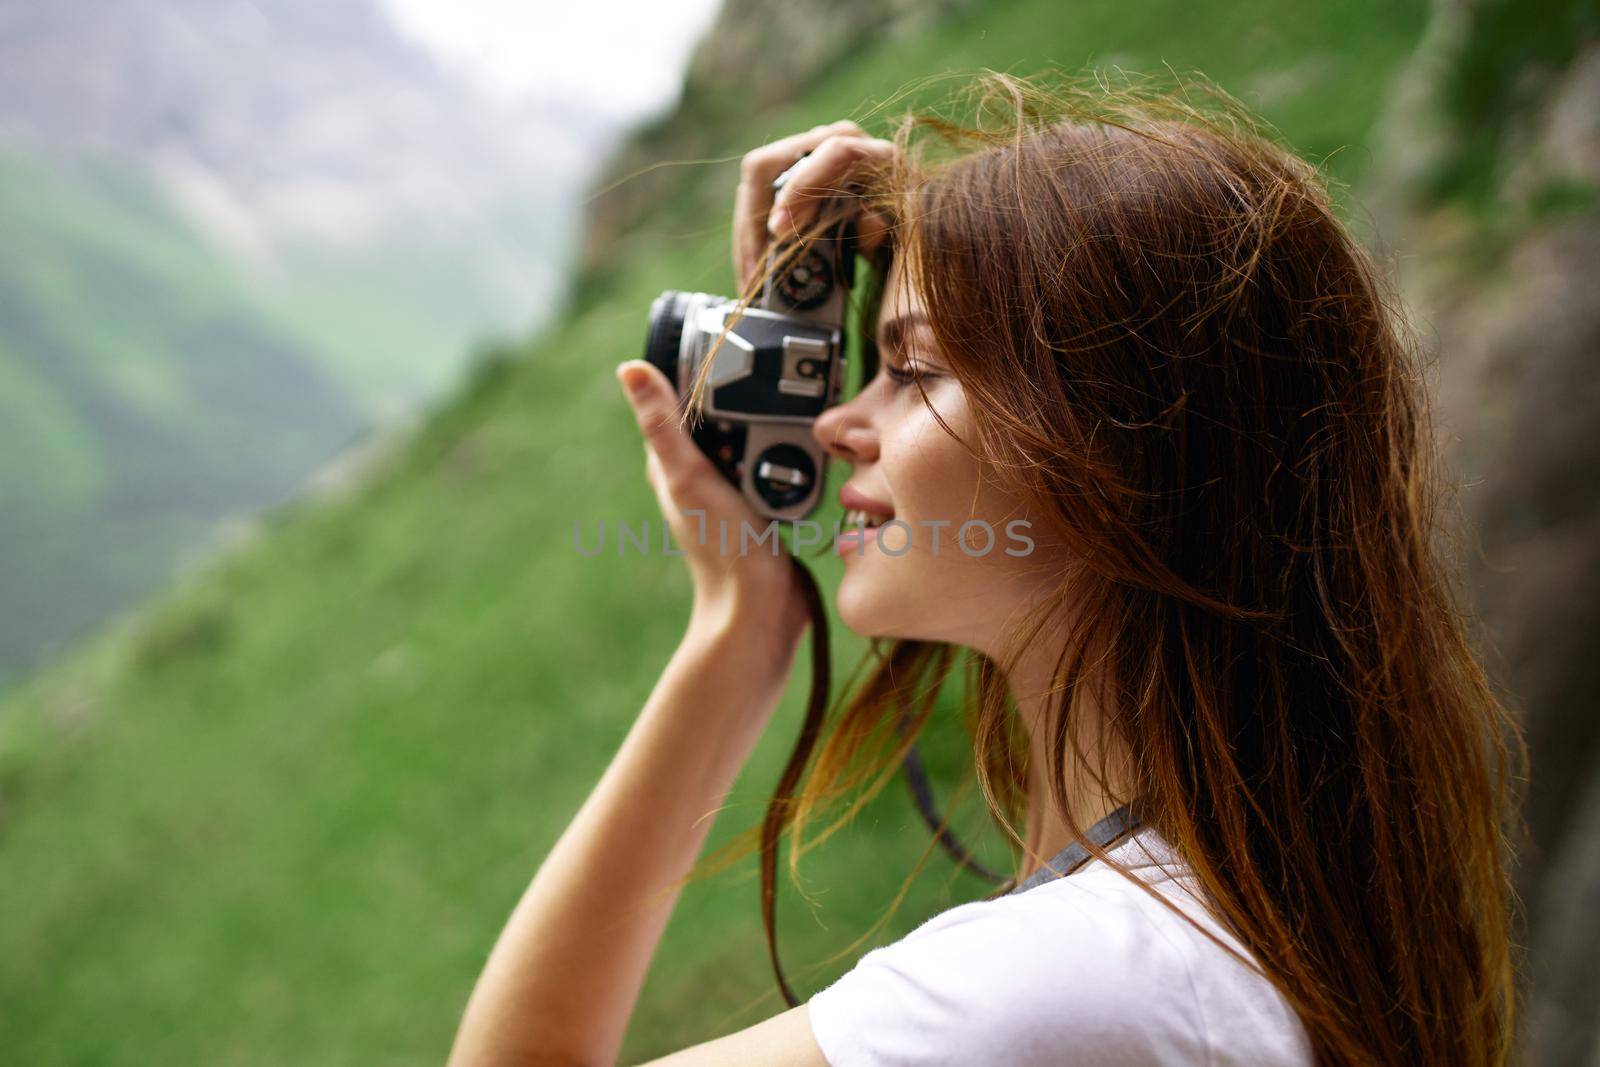 woman photographer outdoors travel lifestyle professional landscape. High quality photo